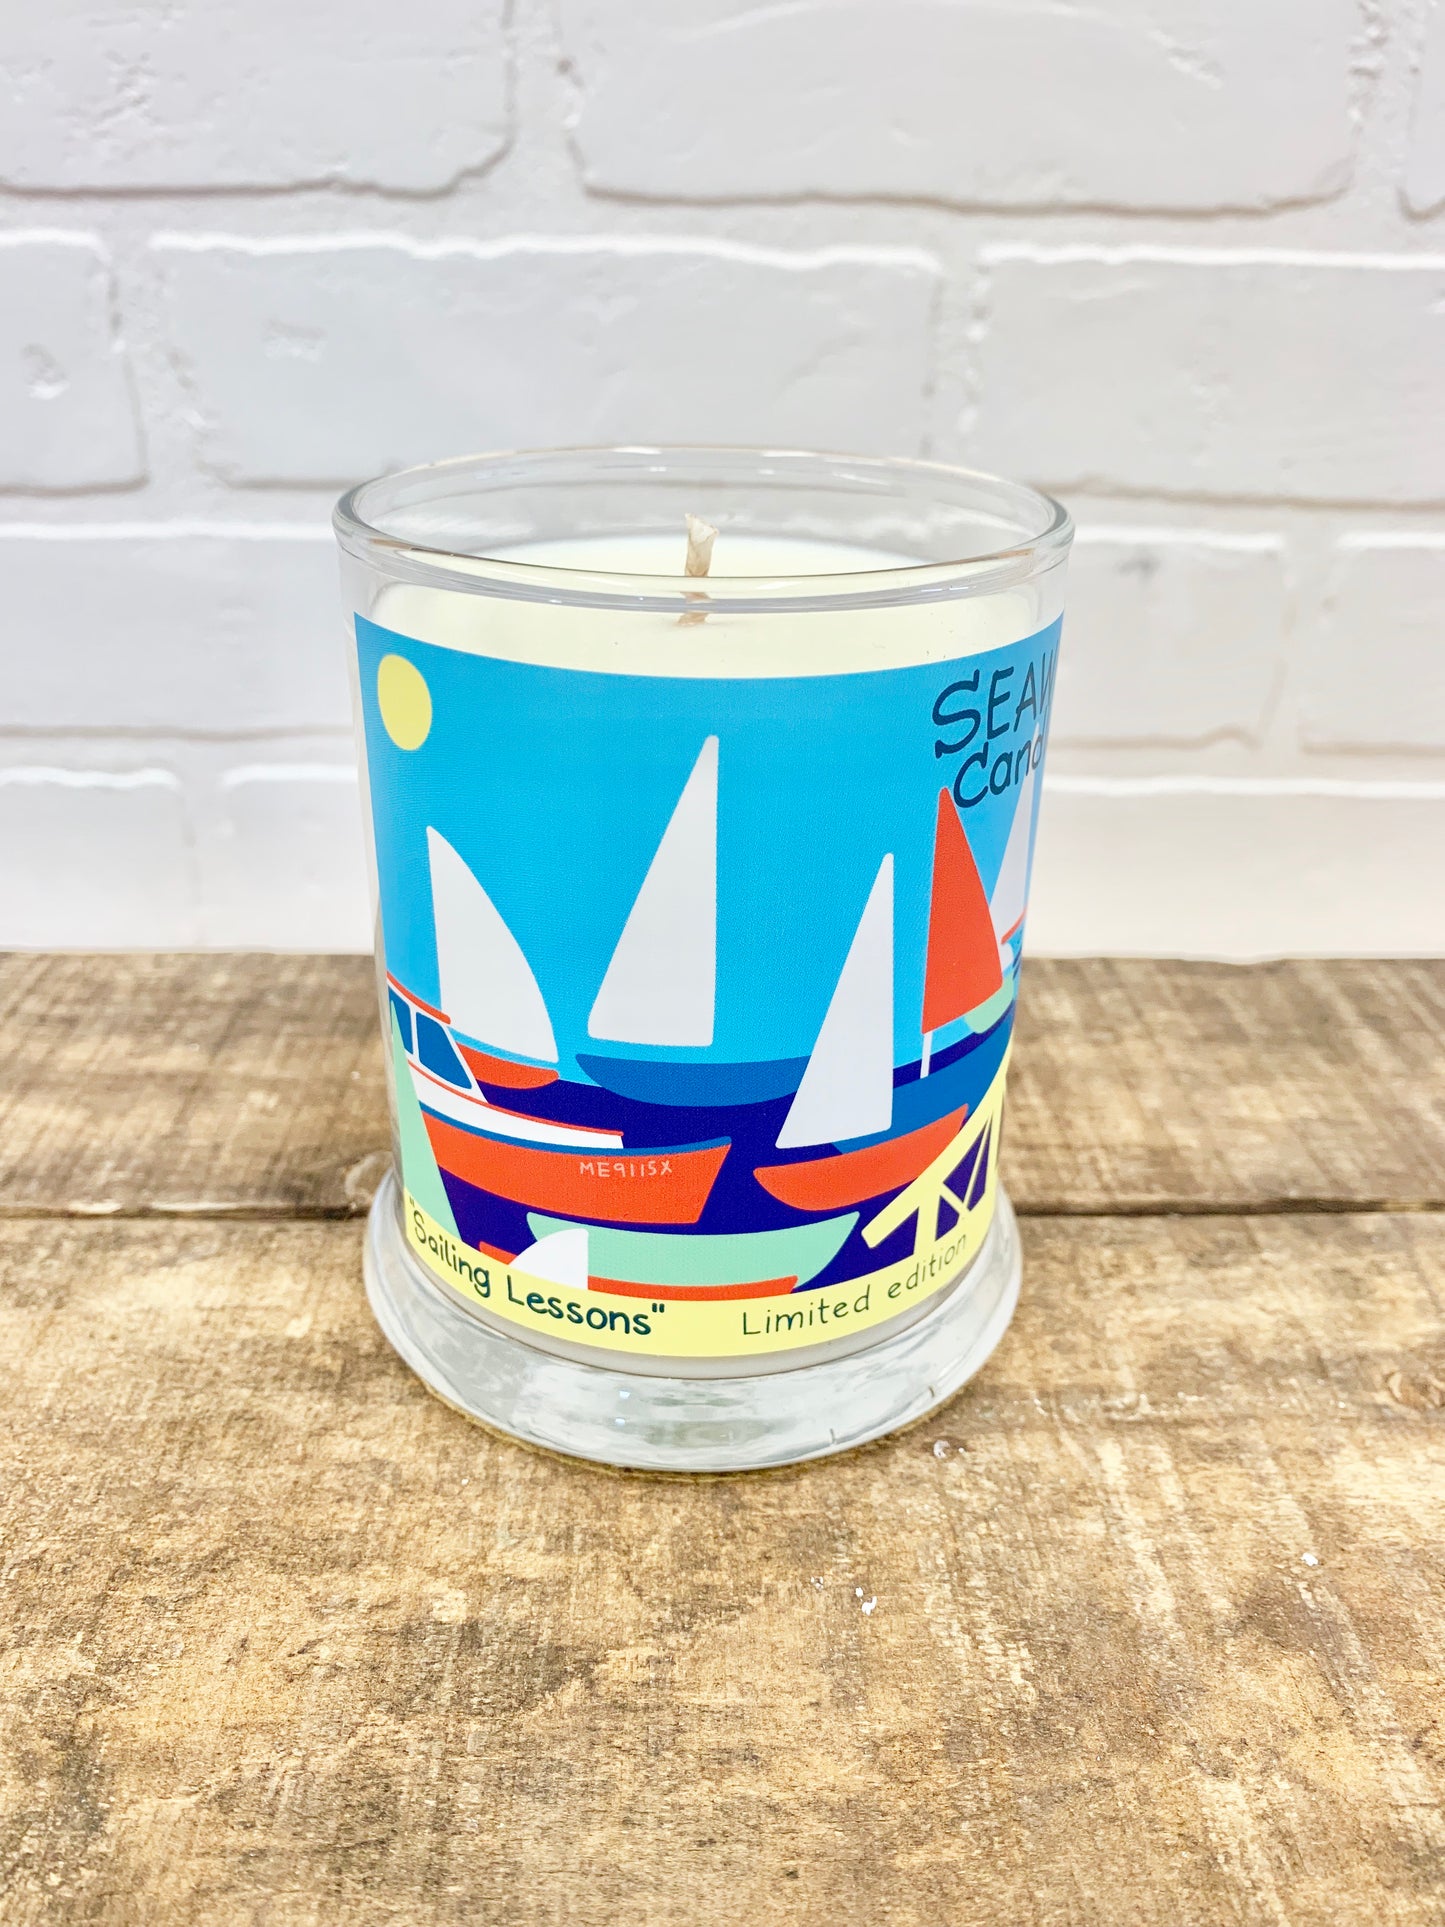 Limited Edition ‘SAILING LESSONS’ Candle